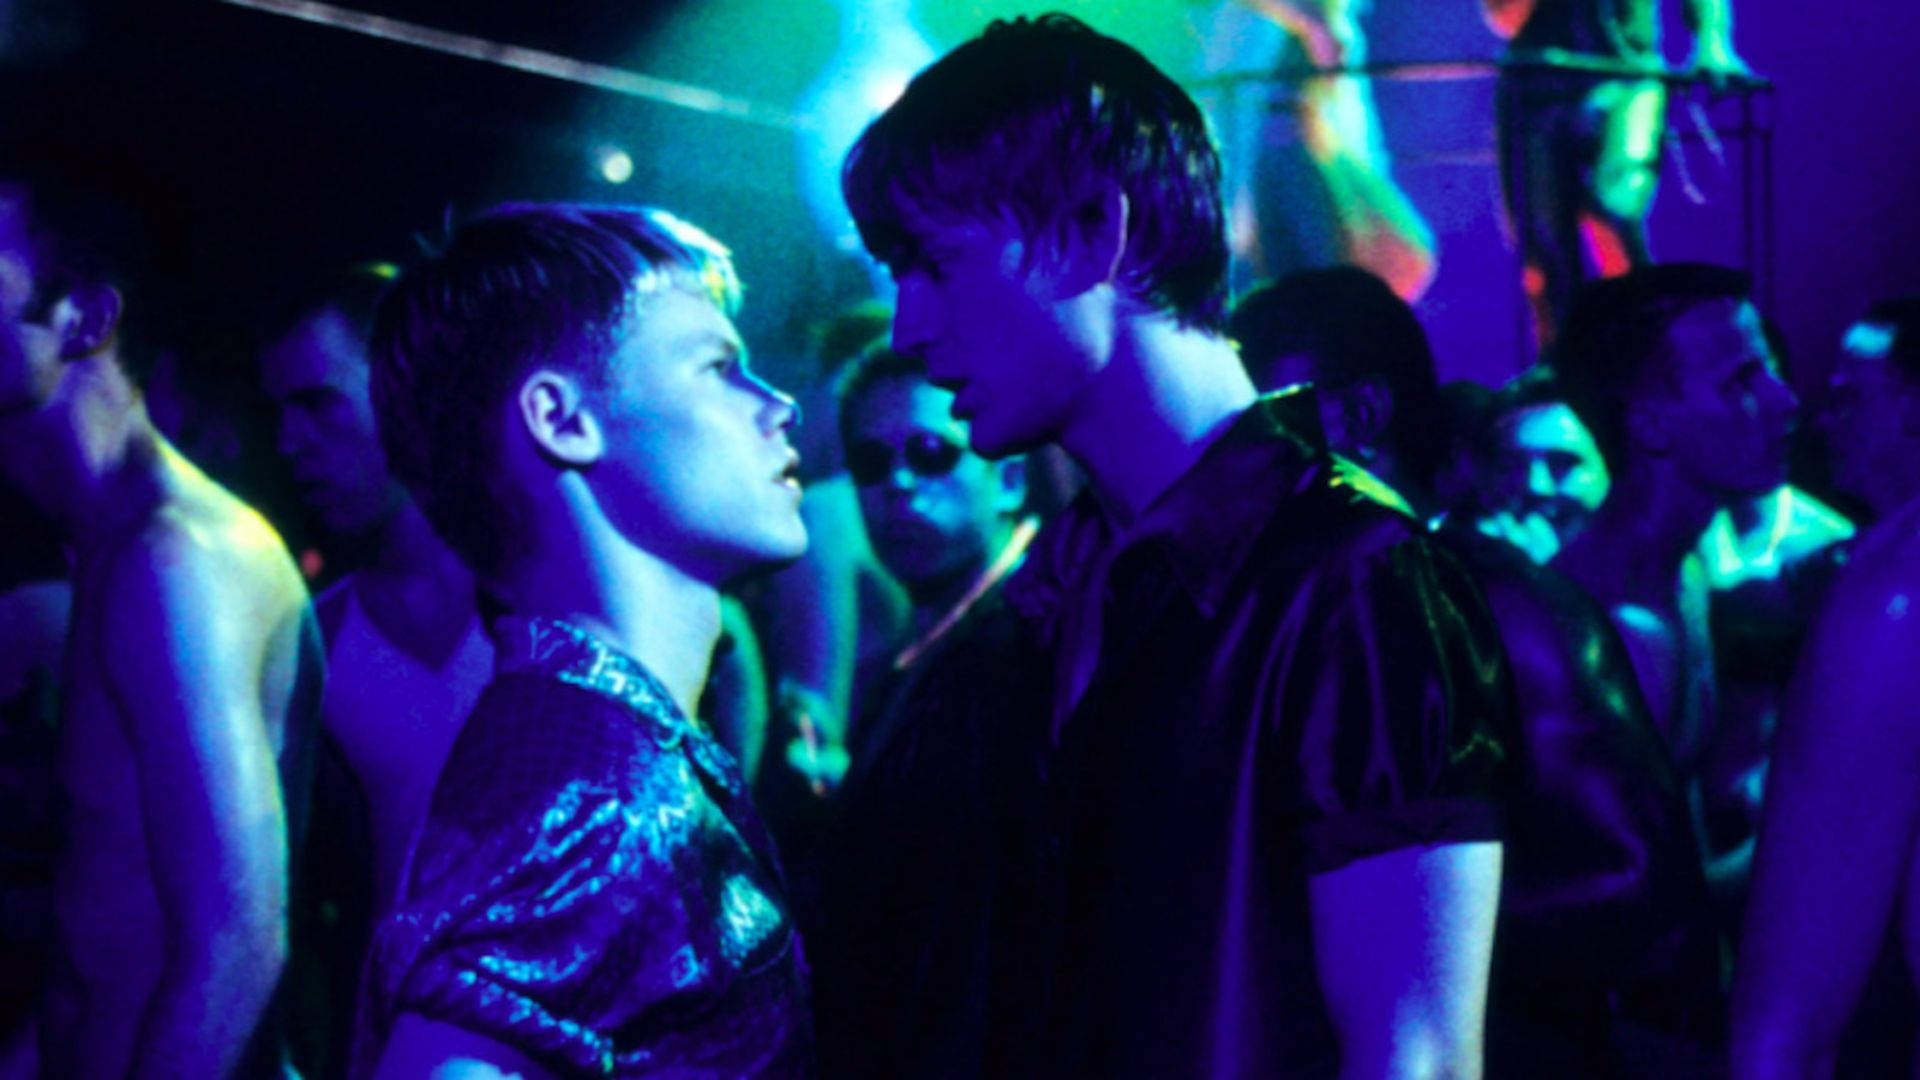 Exciting nightclub scene from Queer As Folk Wallpaper